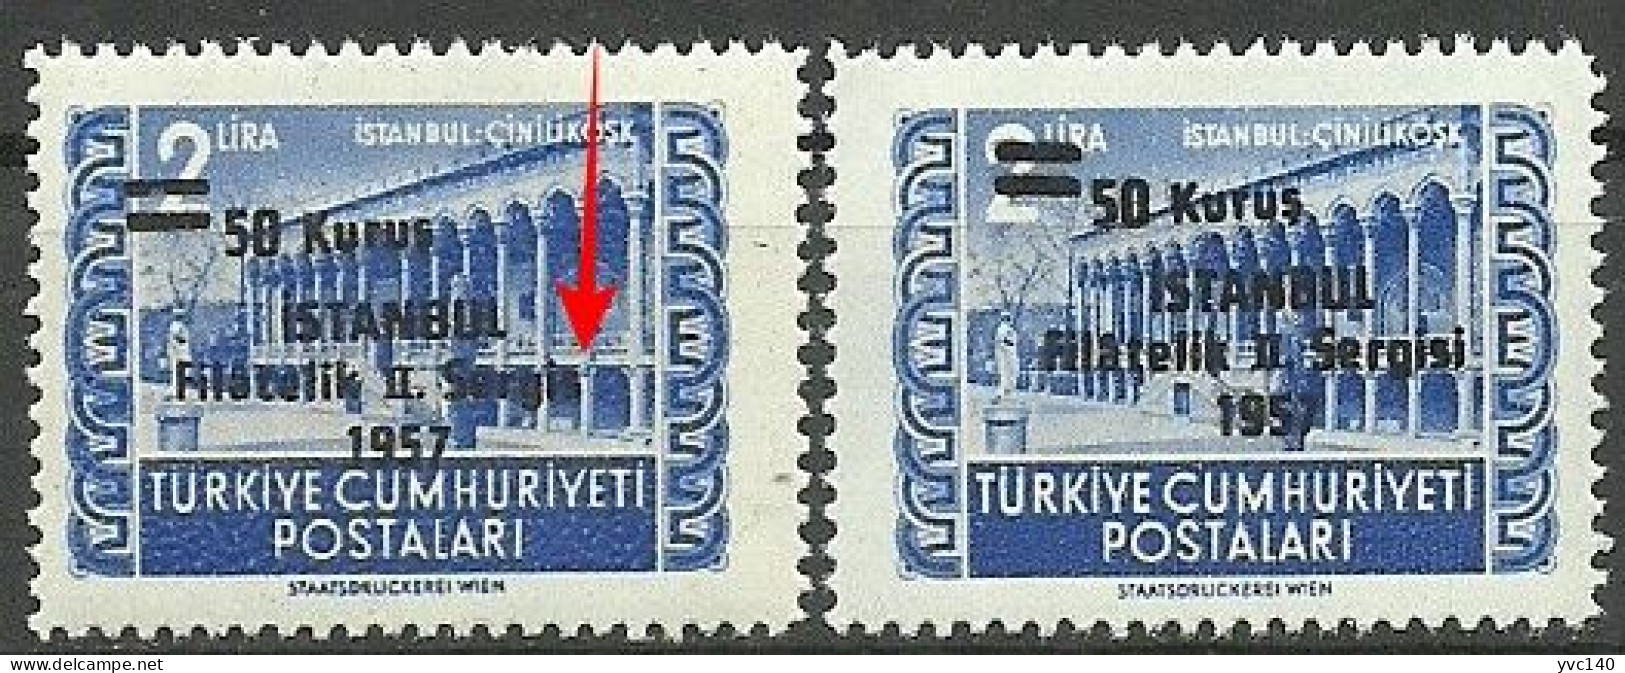 Turkey; 1957 Surcharged Commemorative Stamp For Istanbul Philately Exhibition ERROR "Missing Surcharge" - Unused Stamps